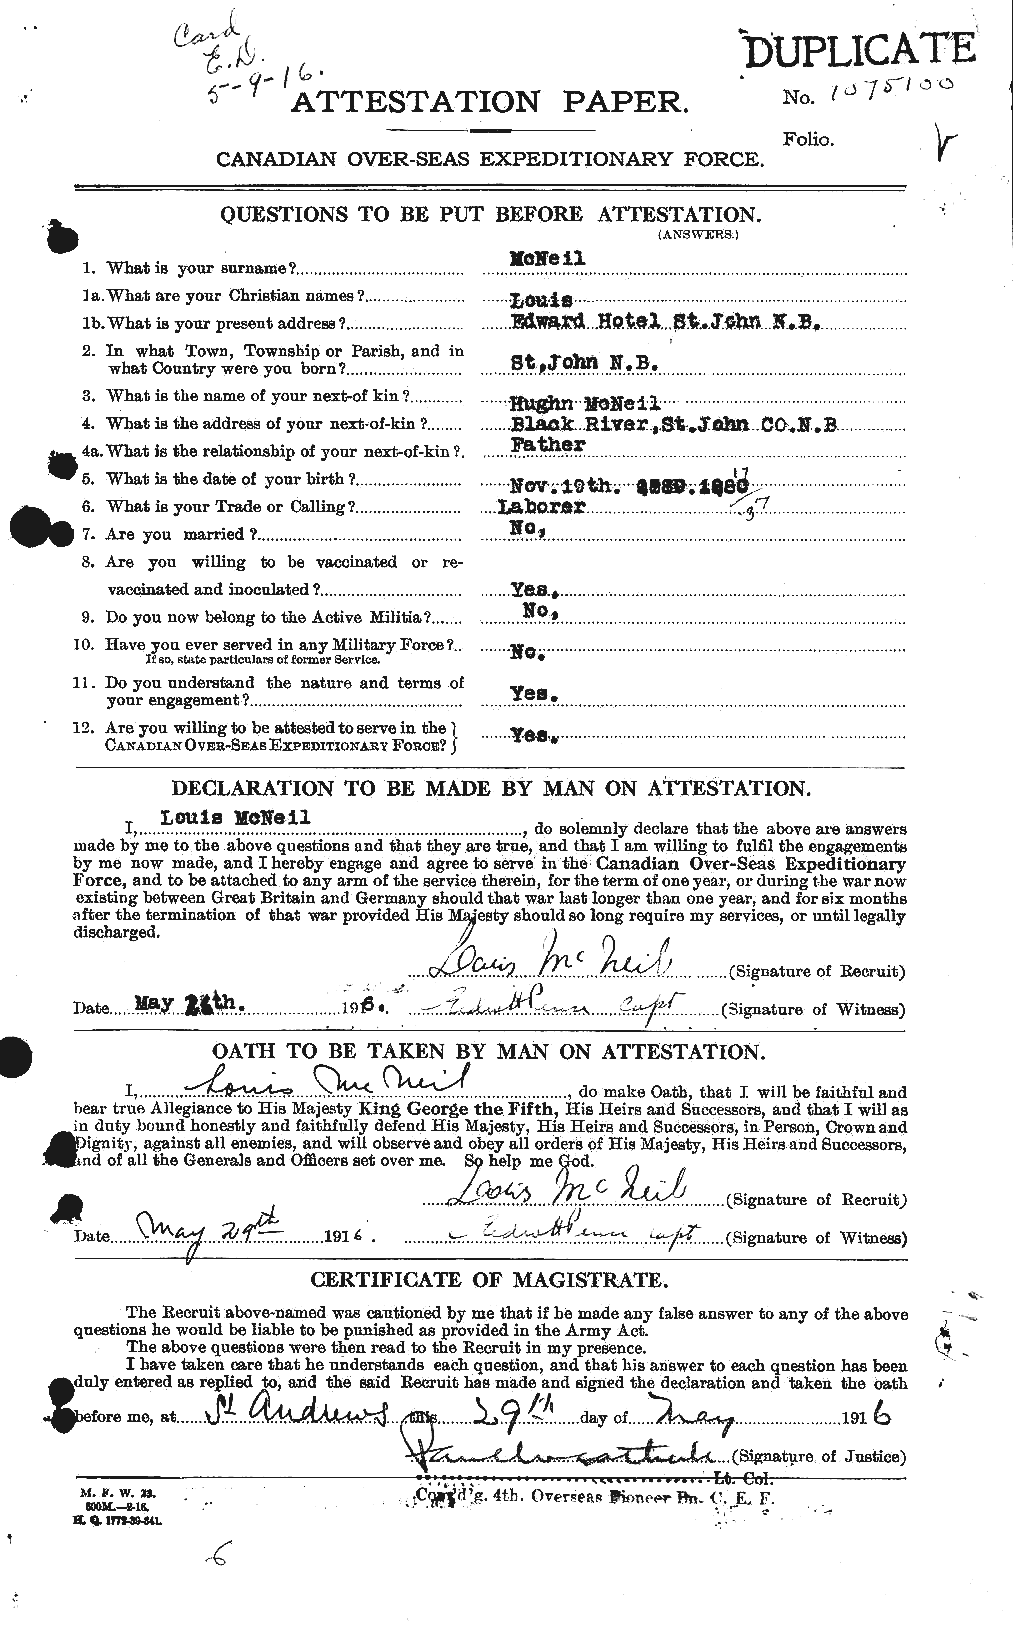 Personnel Records of the First World War - CEF 542388a